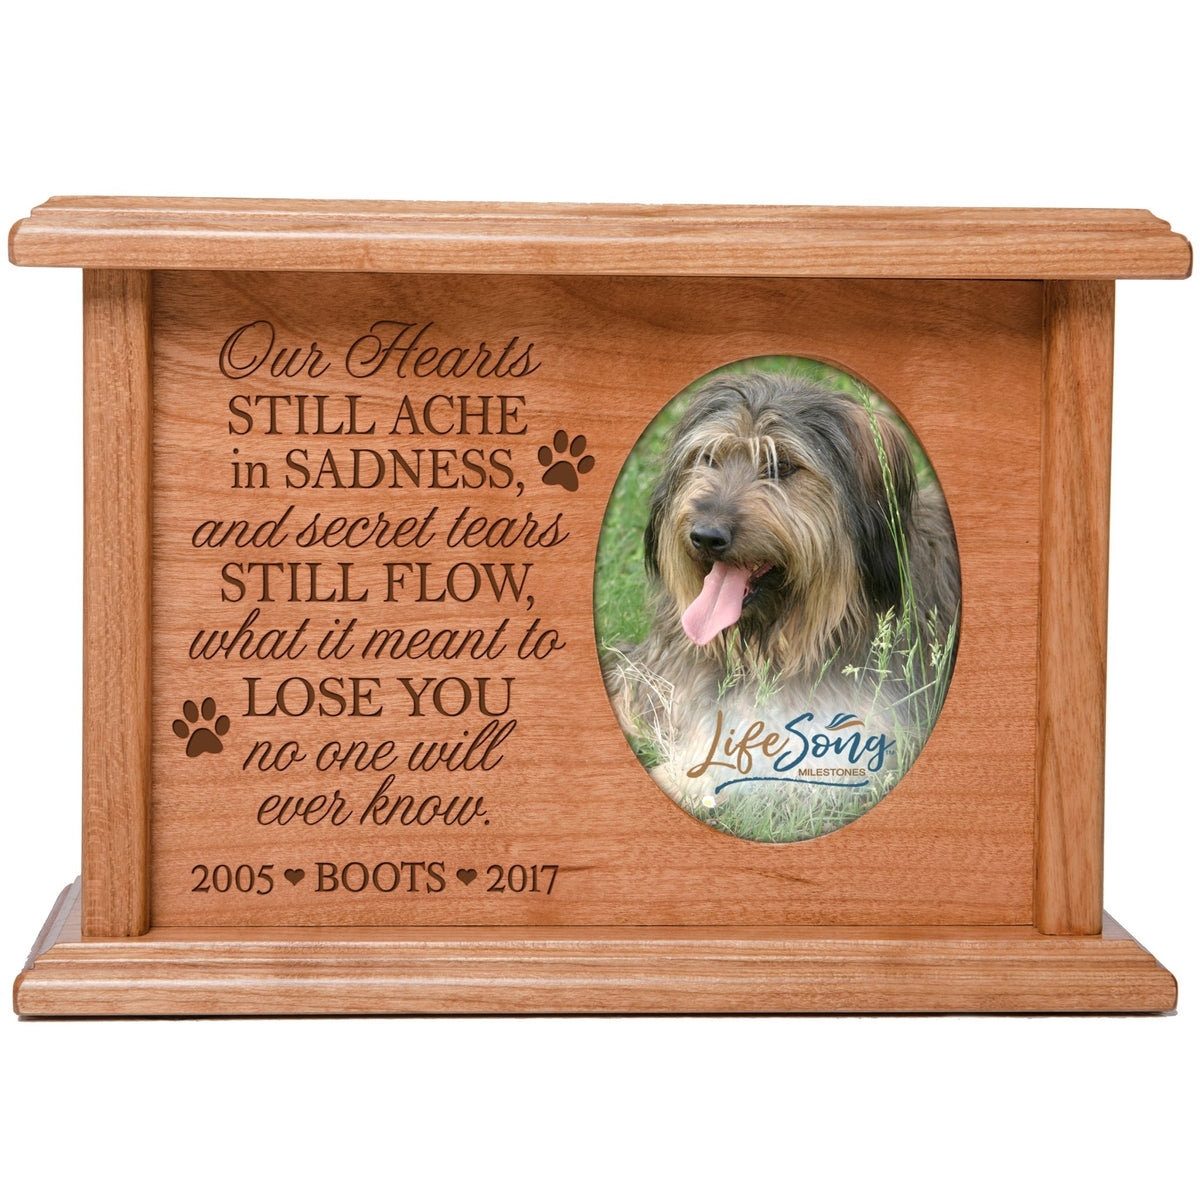 Pet Cremation Keepsake Photo Frame &amp; Urn Box Holds 2x3 Photo Our Hearts Still Ache - LifeSong Milestones